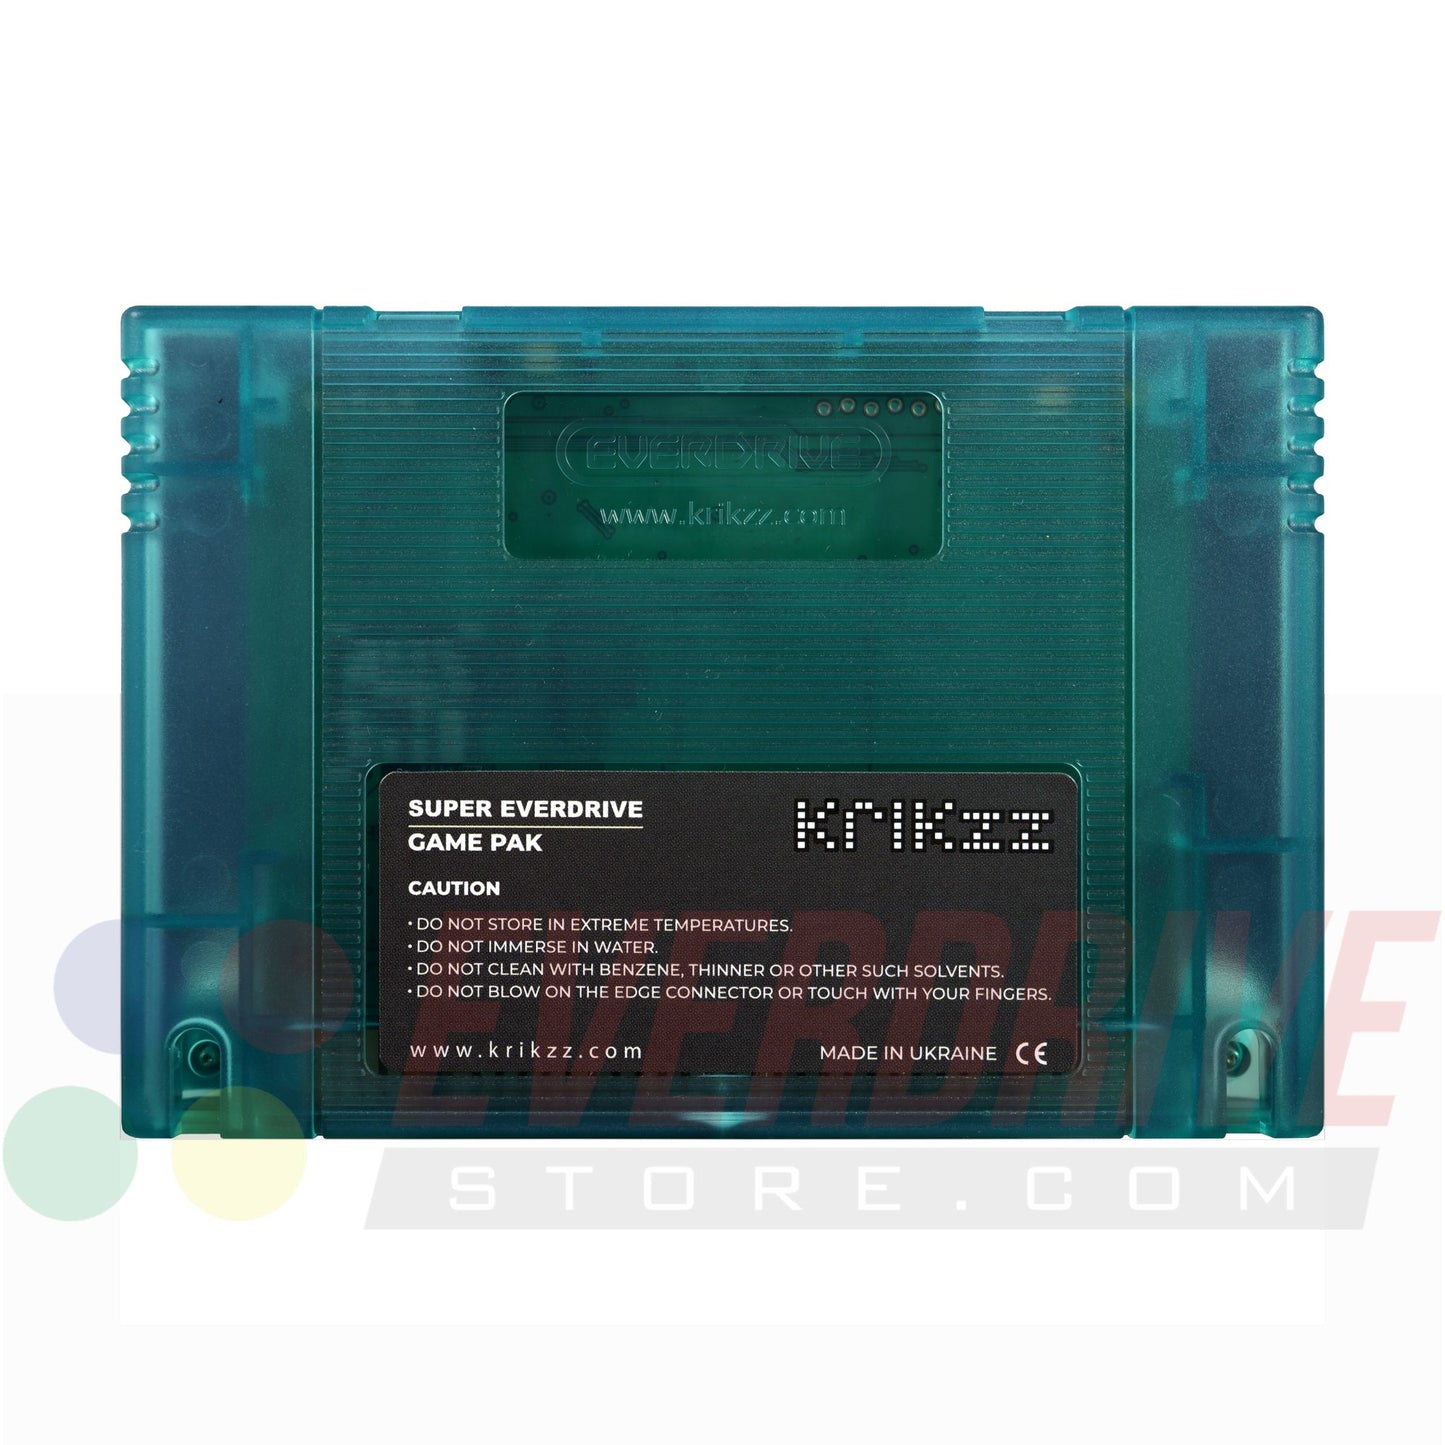 Super Everdrive X6 DSP - Frosted Turquoise